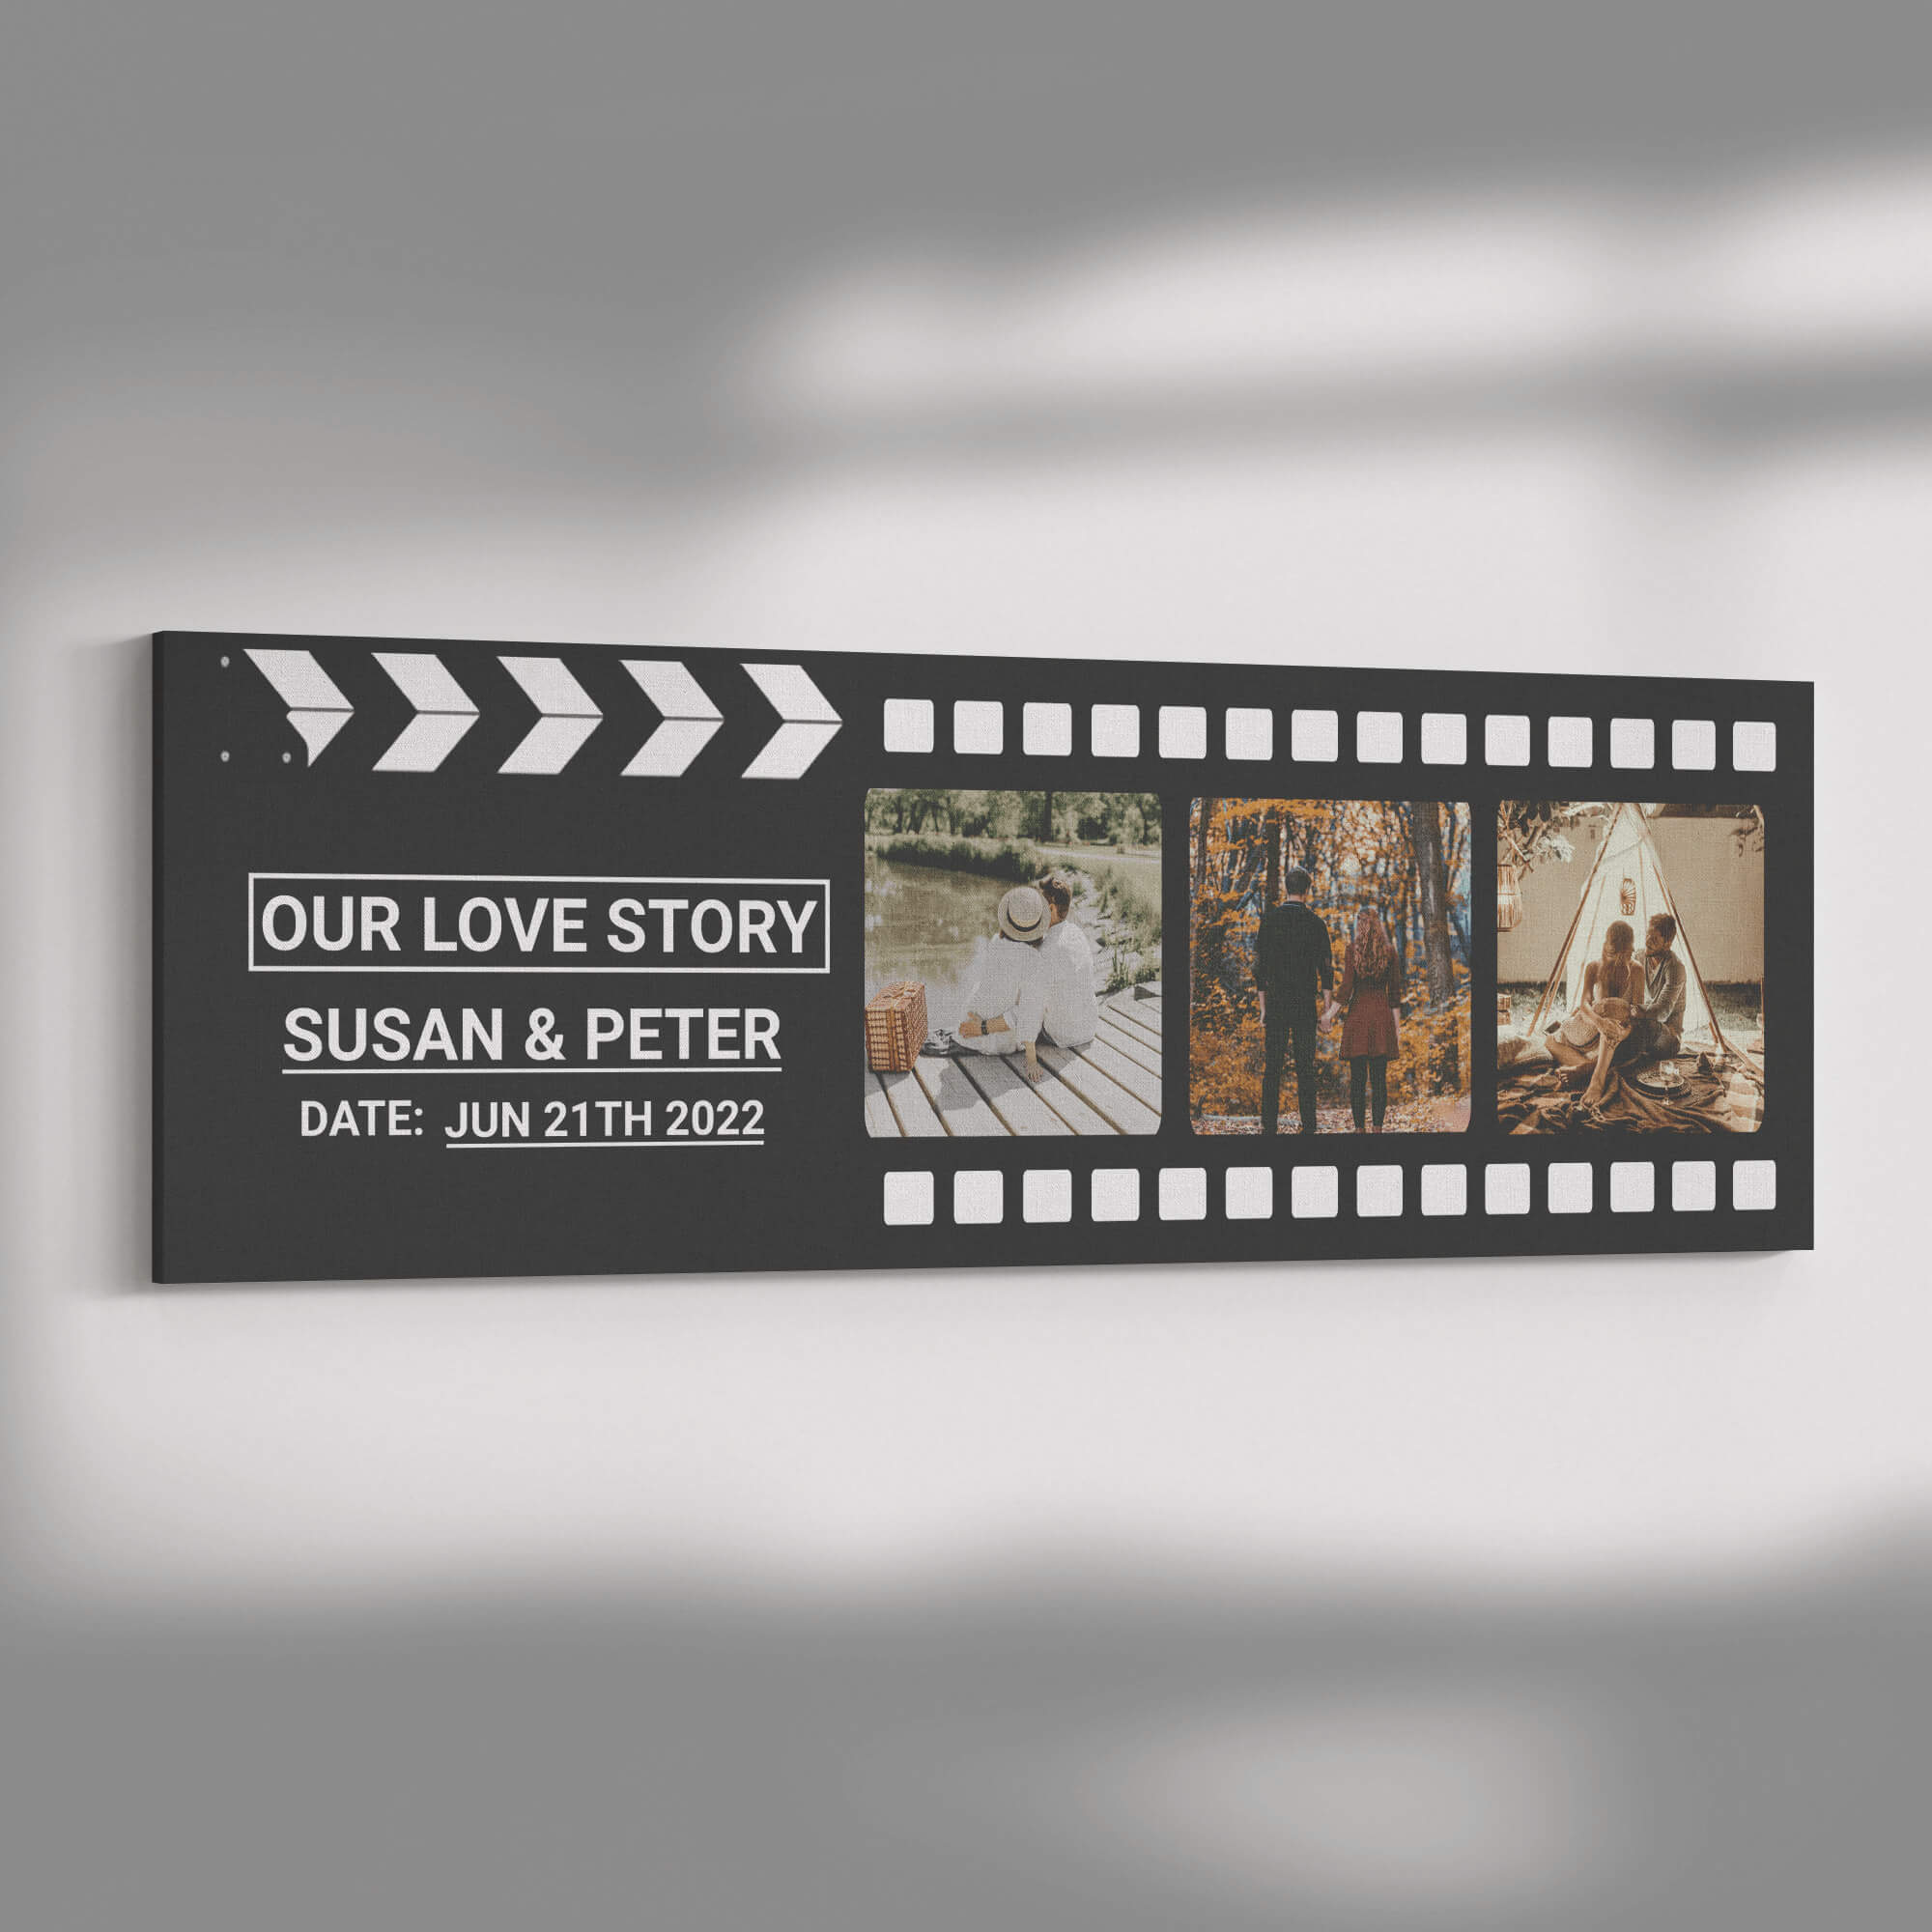 Our Love Story is My Favorite Anniversary Canvas, 8th Anniversary Gift, Cotton Anniversary Gift, Iron Anniversary Gifts